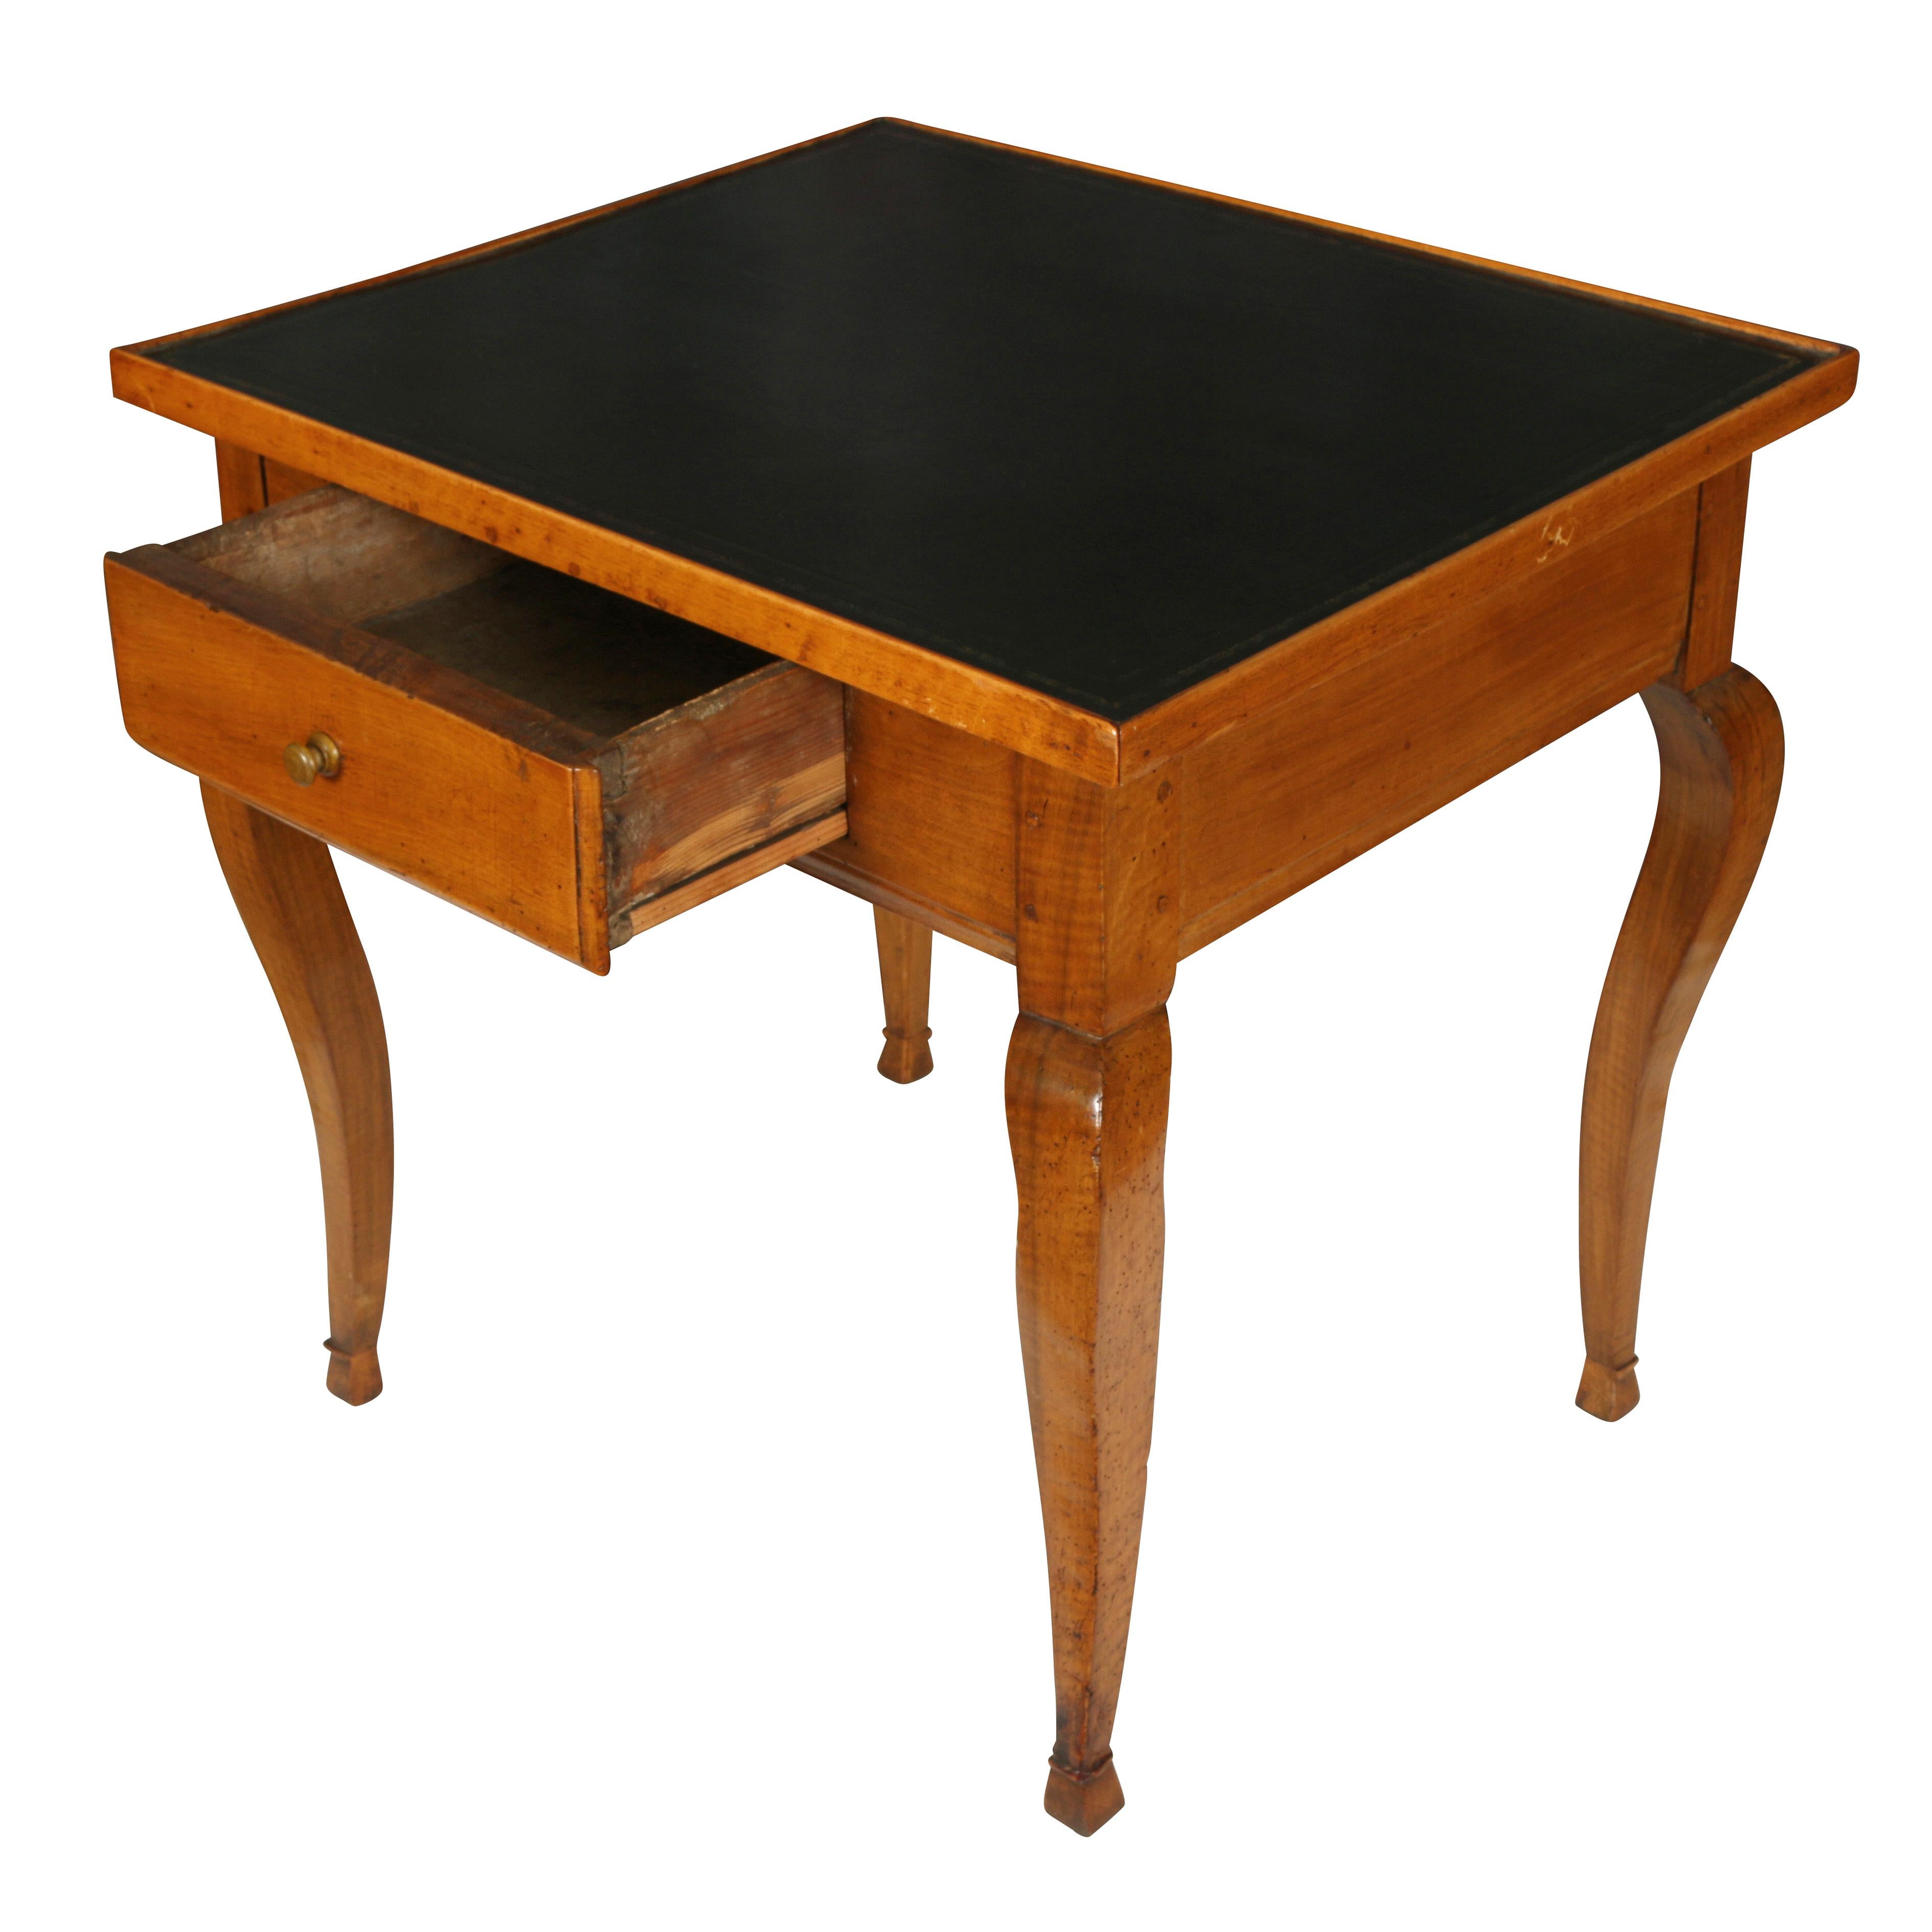 A striking 19th-century walnut French writing table with one drawer and a black leather top.  The table has developed a rich, warm patina and its size make it perfect as a small desk or a side table.